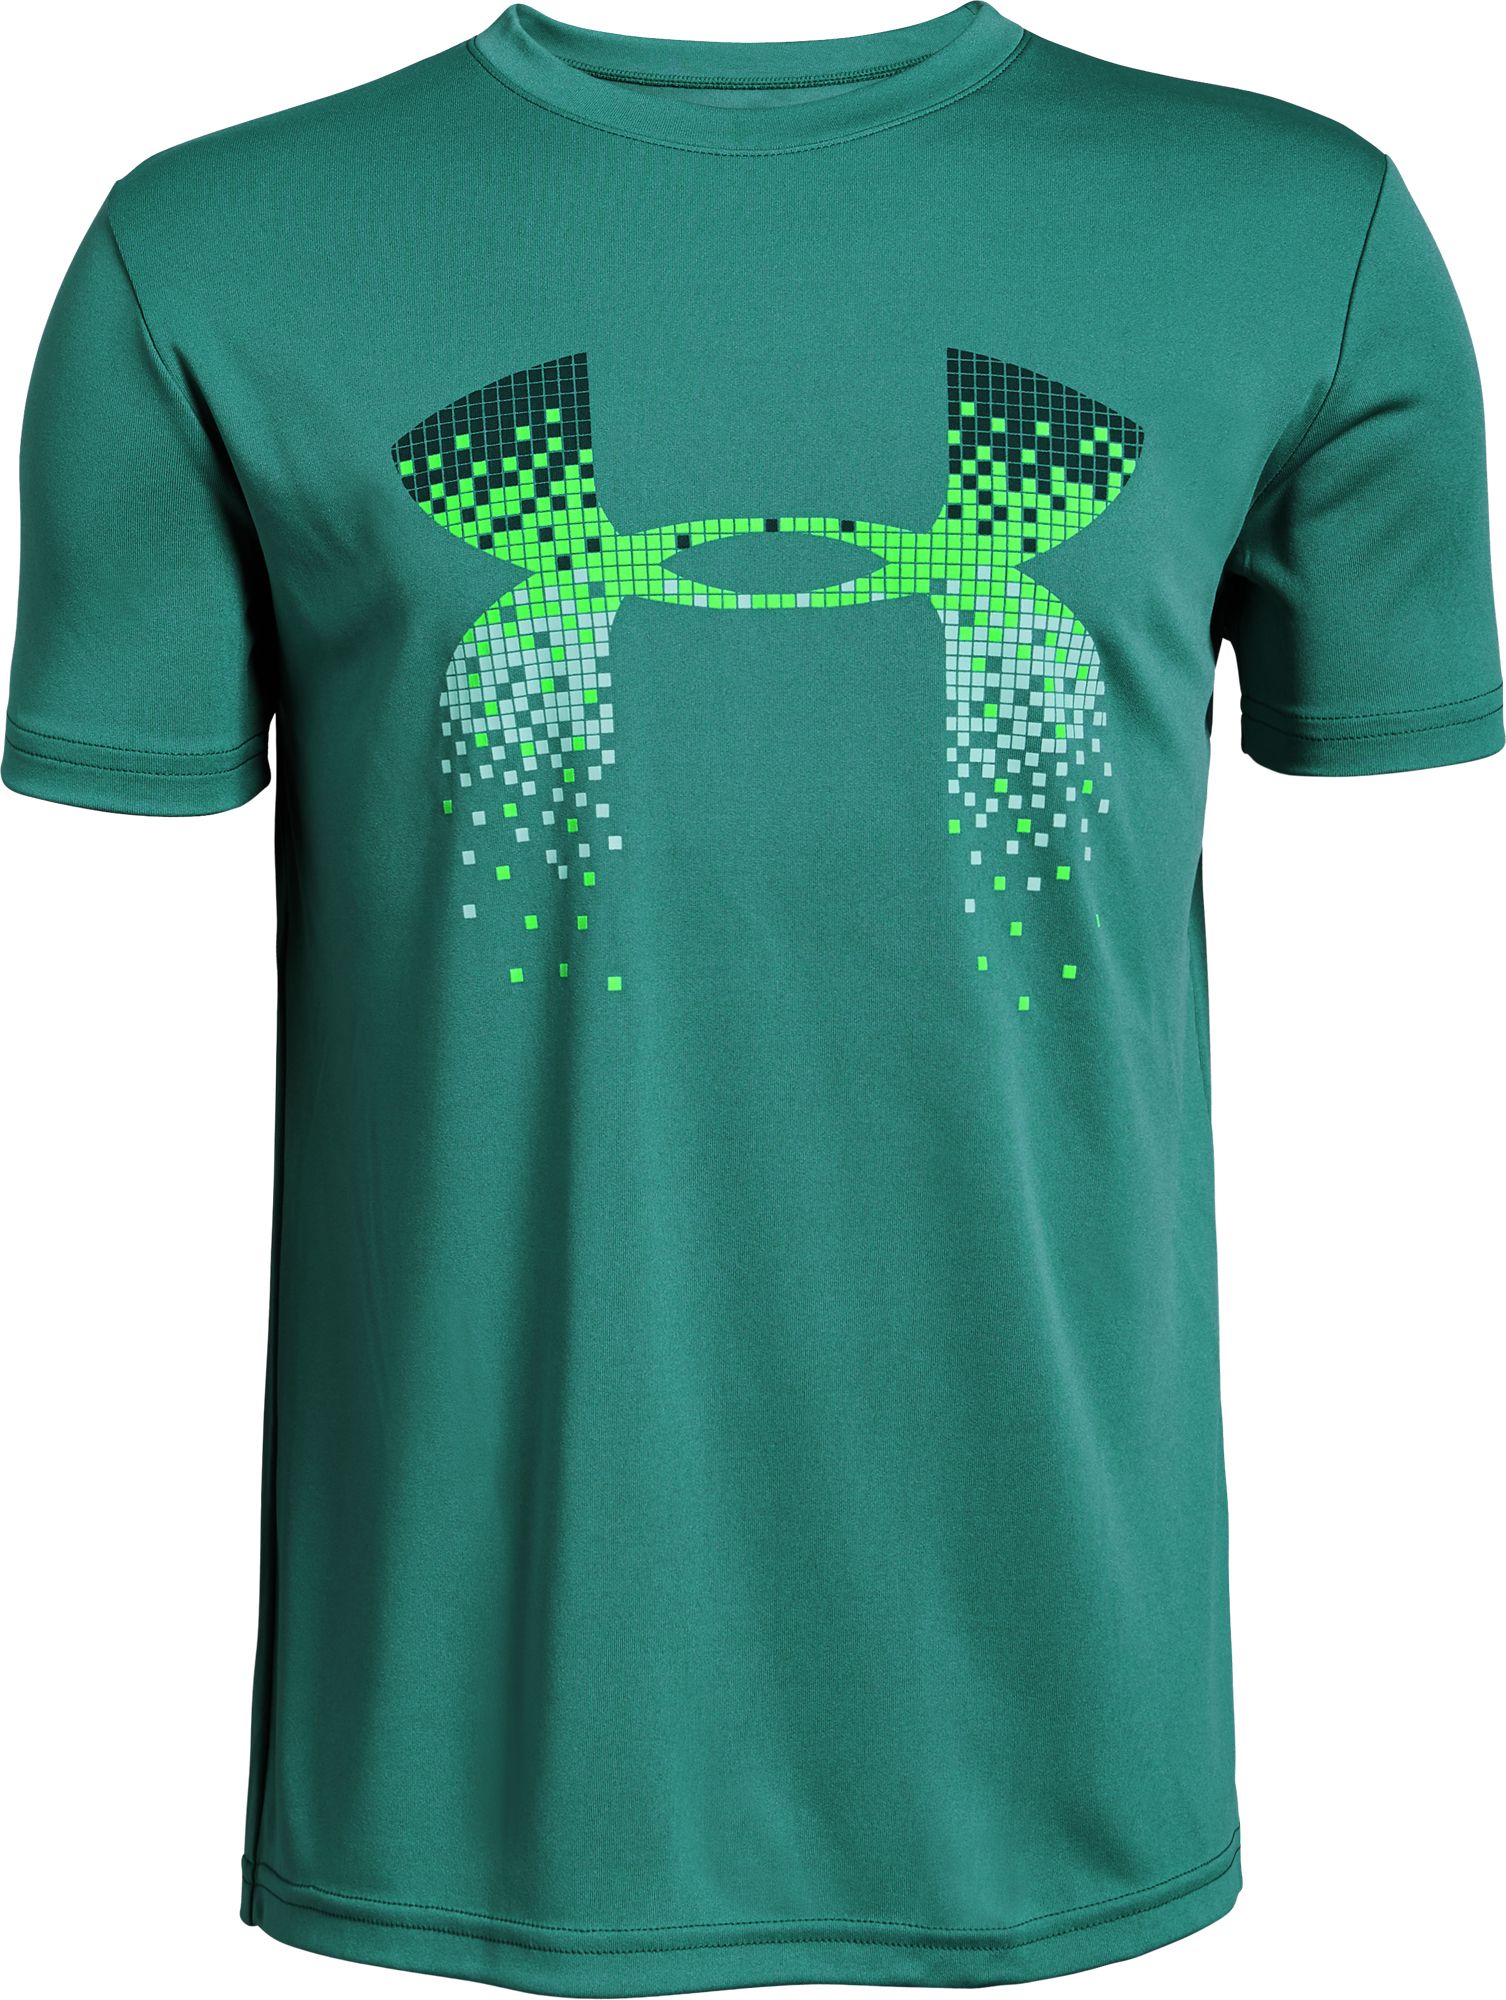 Green Under Armour Shirts | DICK'S 